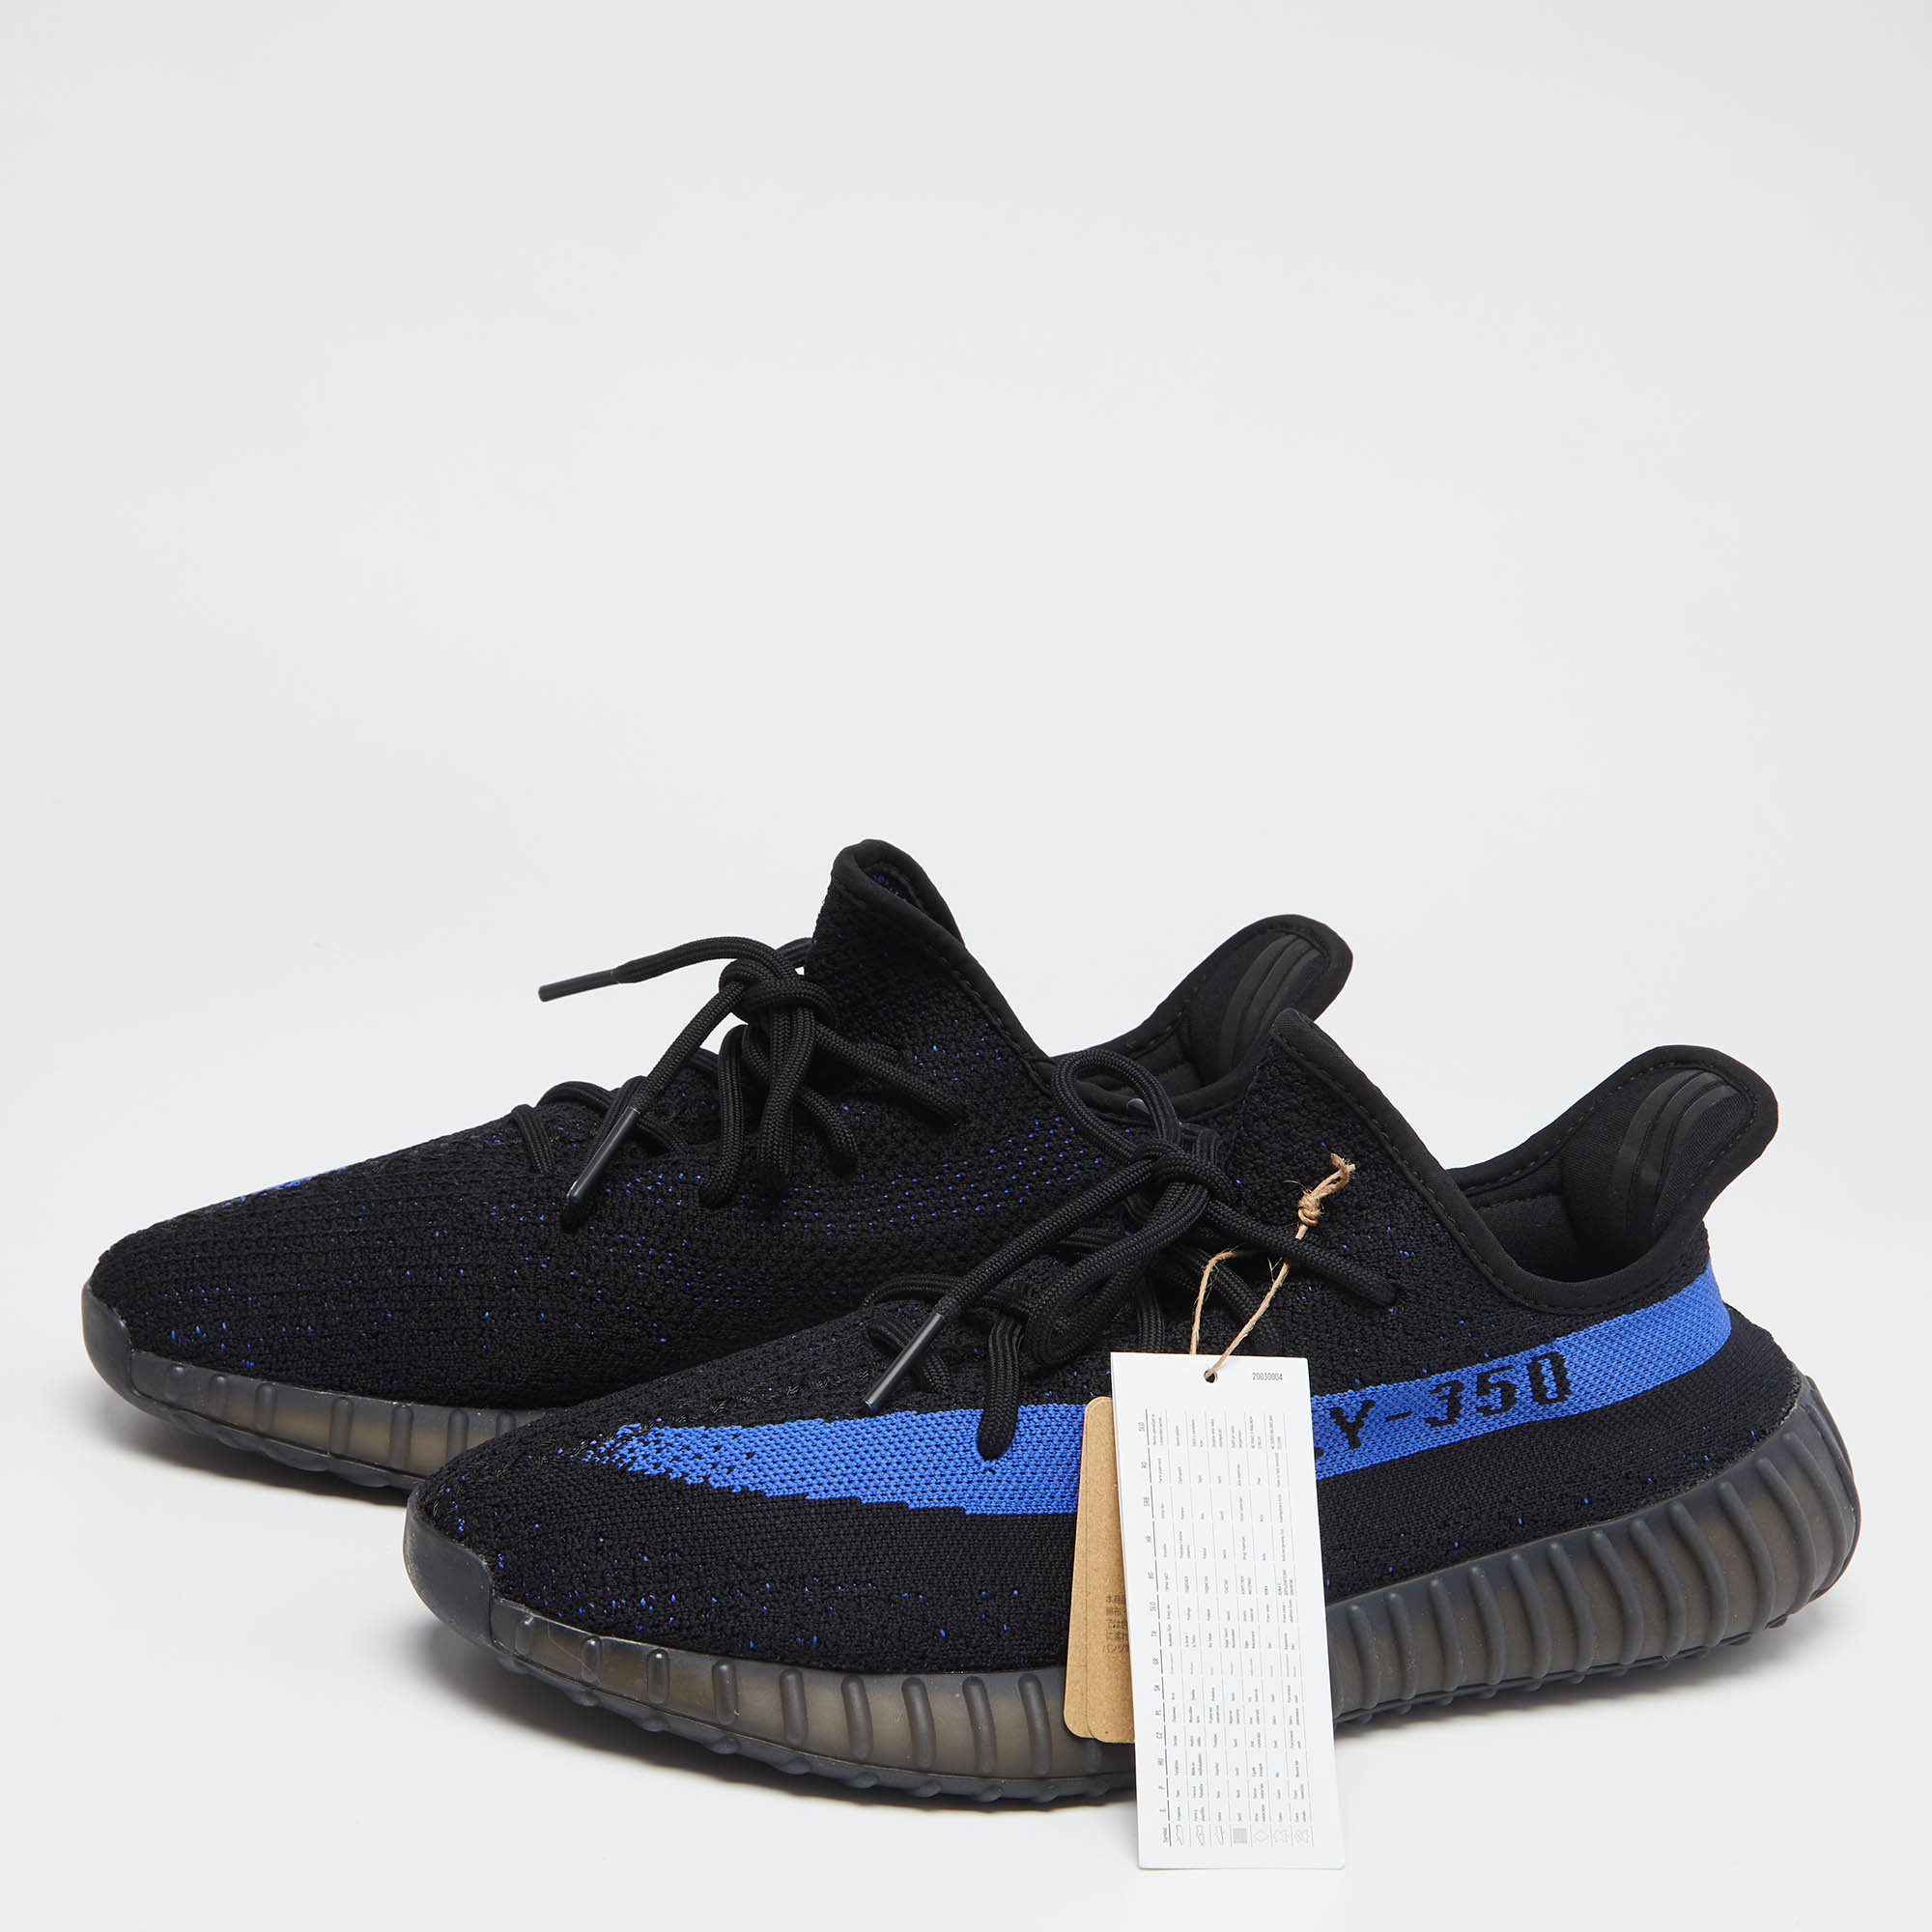 

Adidas Yeezy Boost Blue Knit Fabric 350 V2 Dazzling Sneakers Size 46 2/3, Black